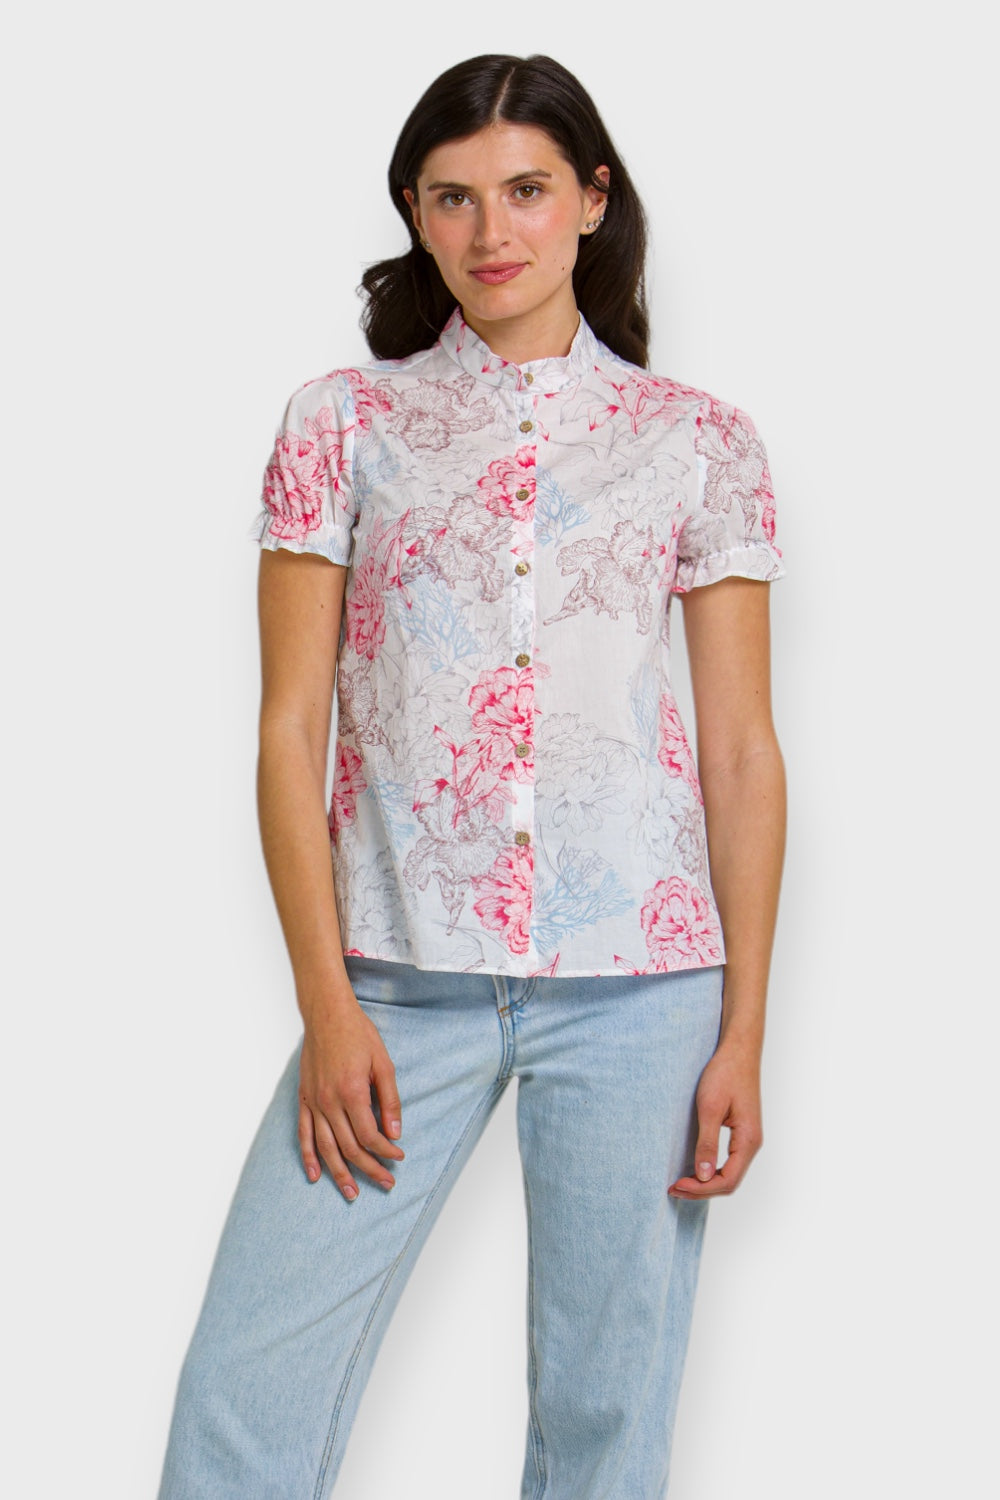 Mia White Floral Puff Sleeve Button Up Cotton Shirt by Marise.Eco.Couture Italian Women's Clothing